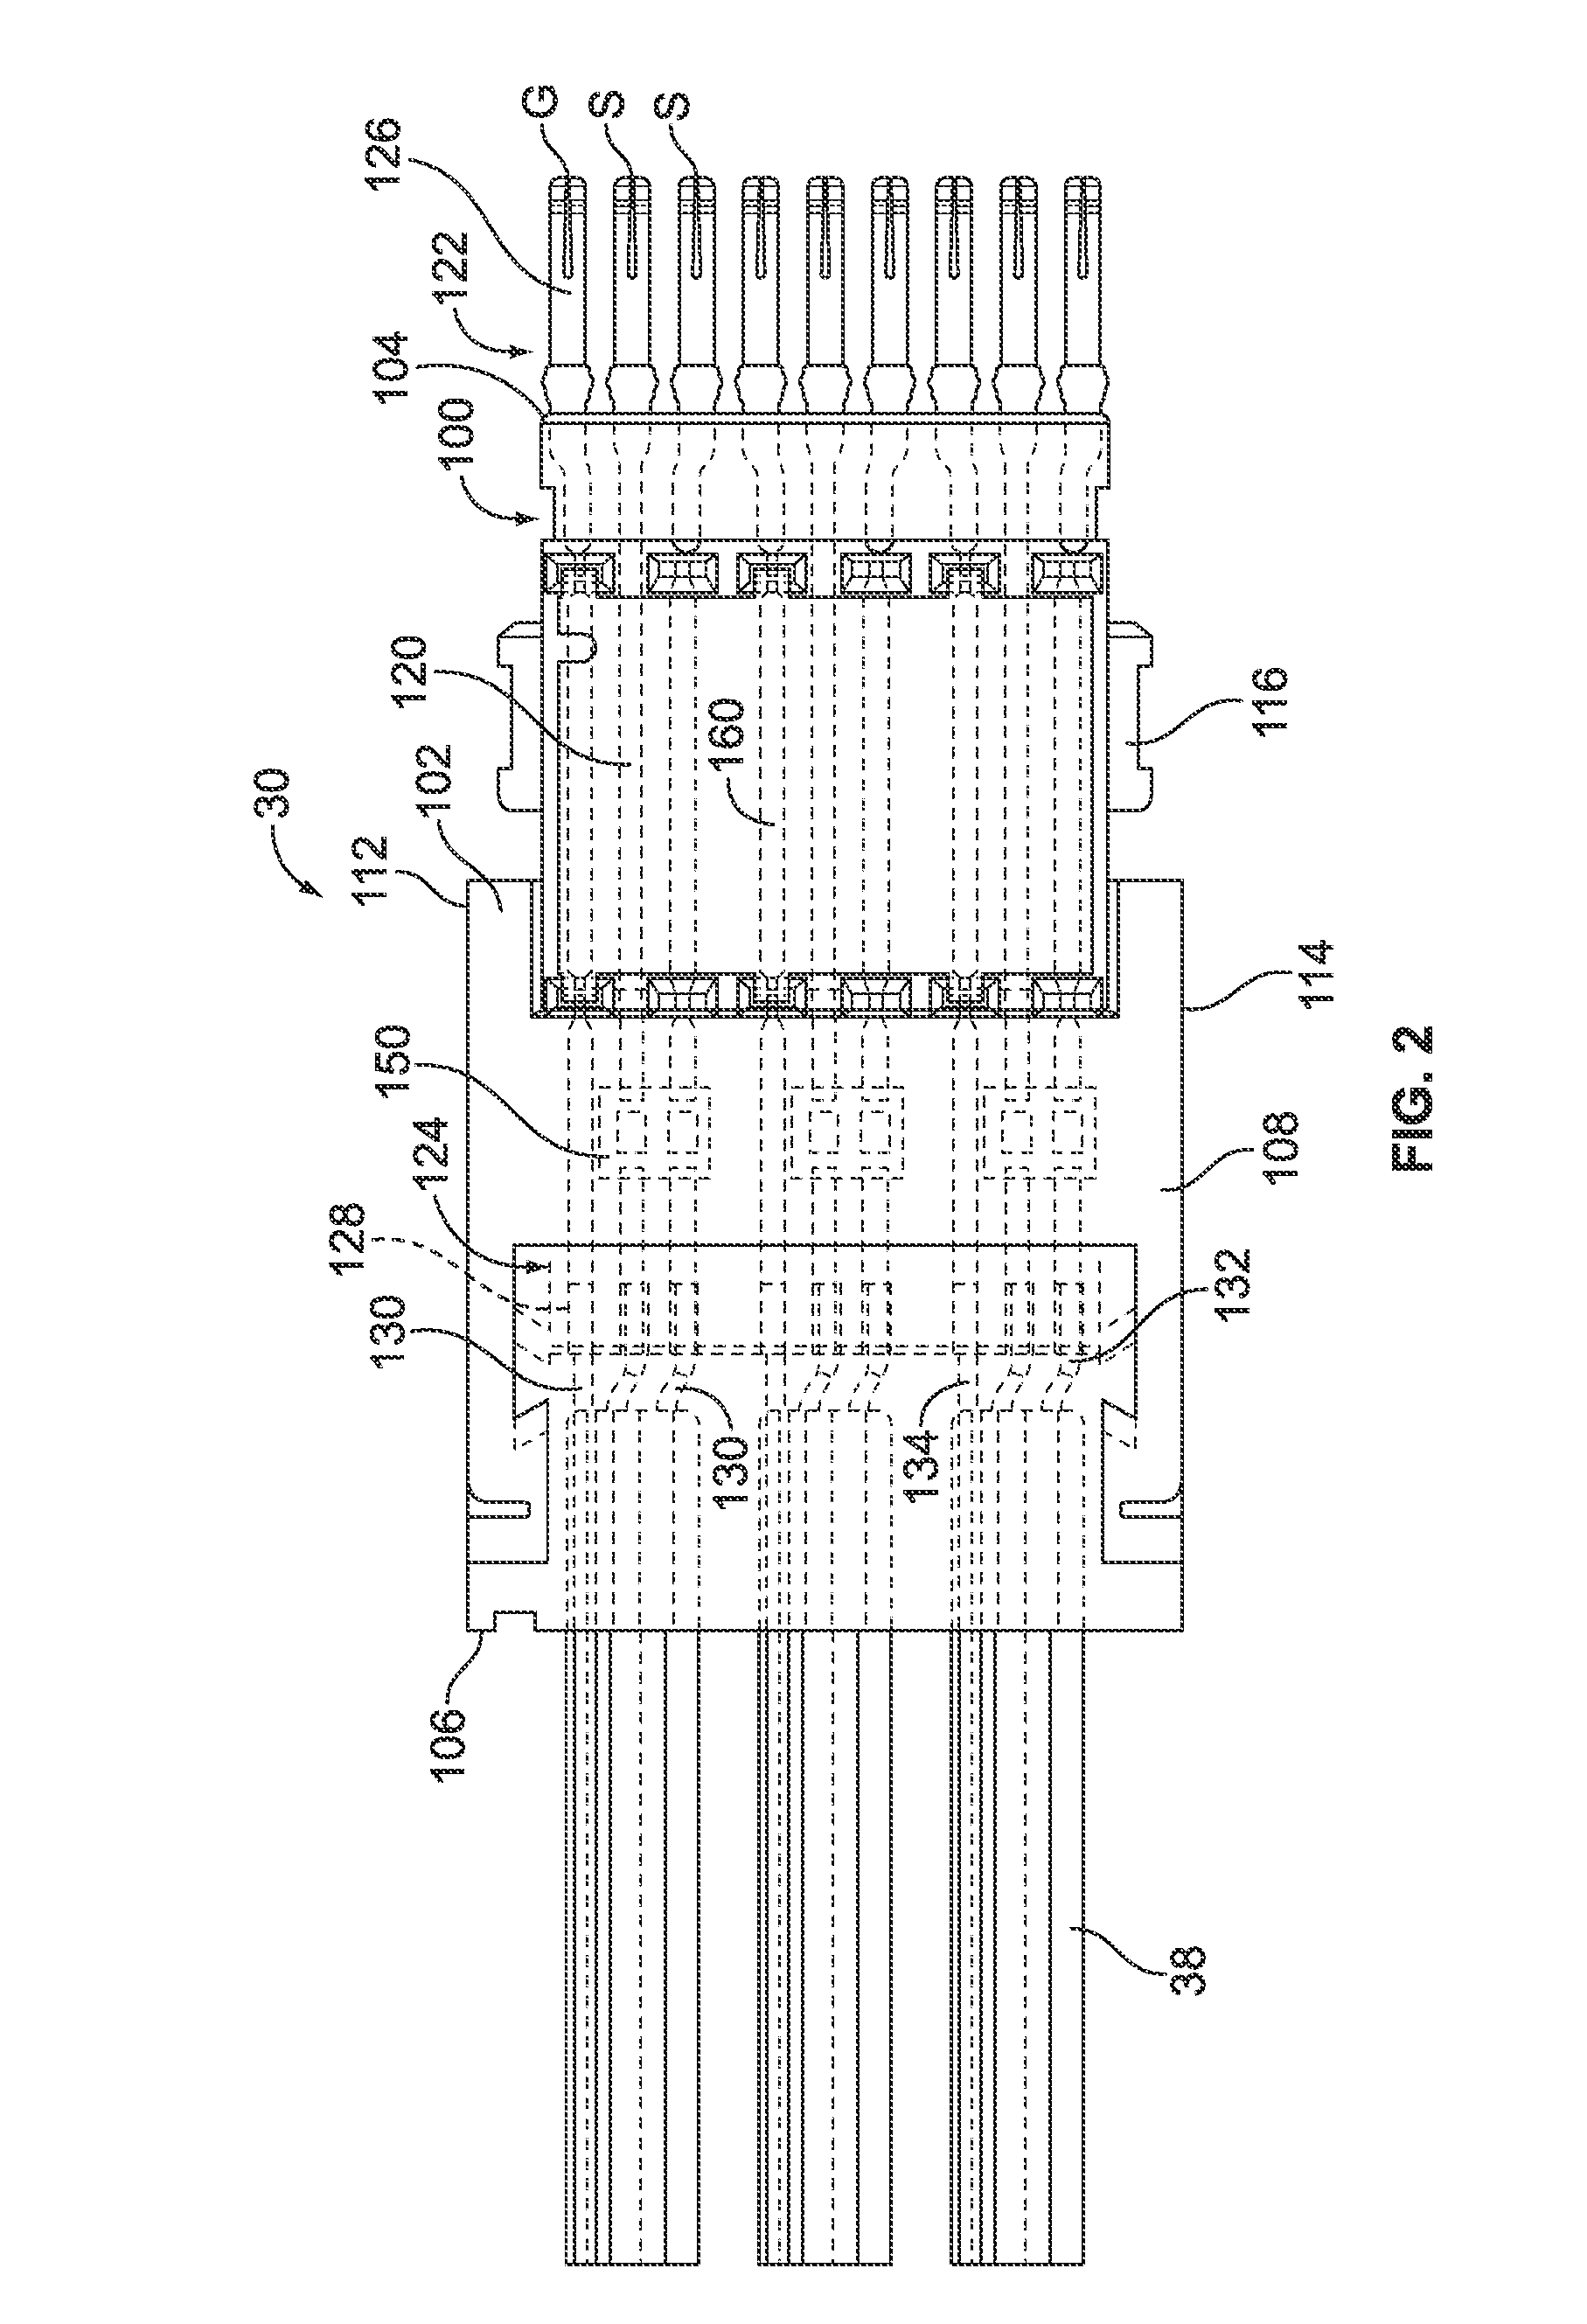 Connector assembly having a compensation circuit component